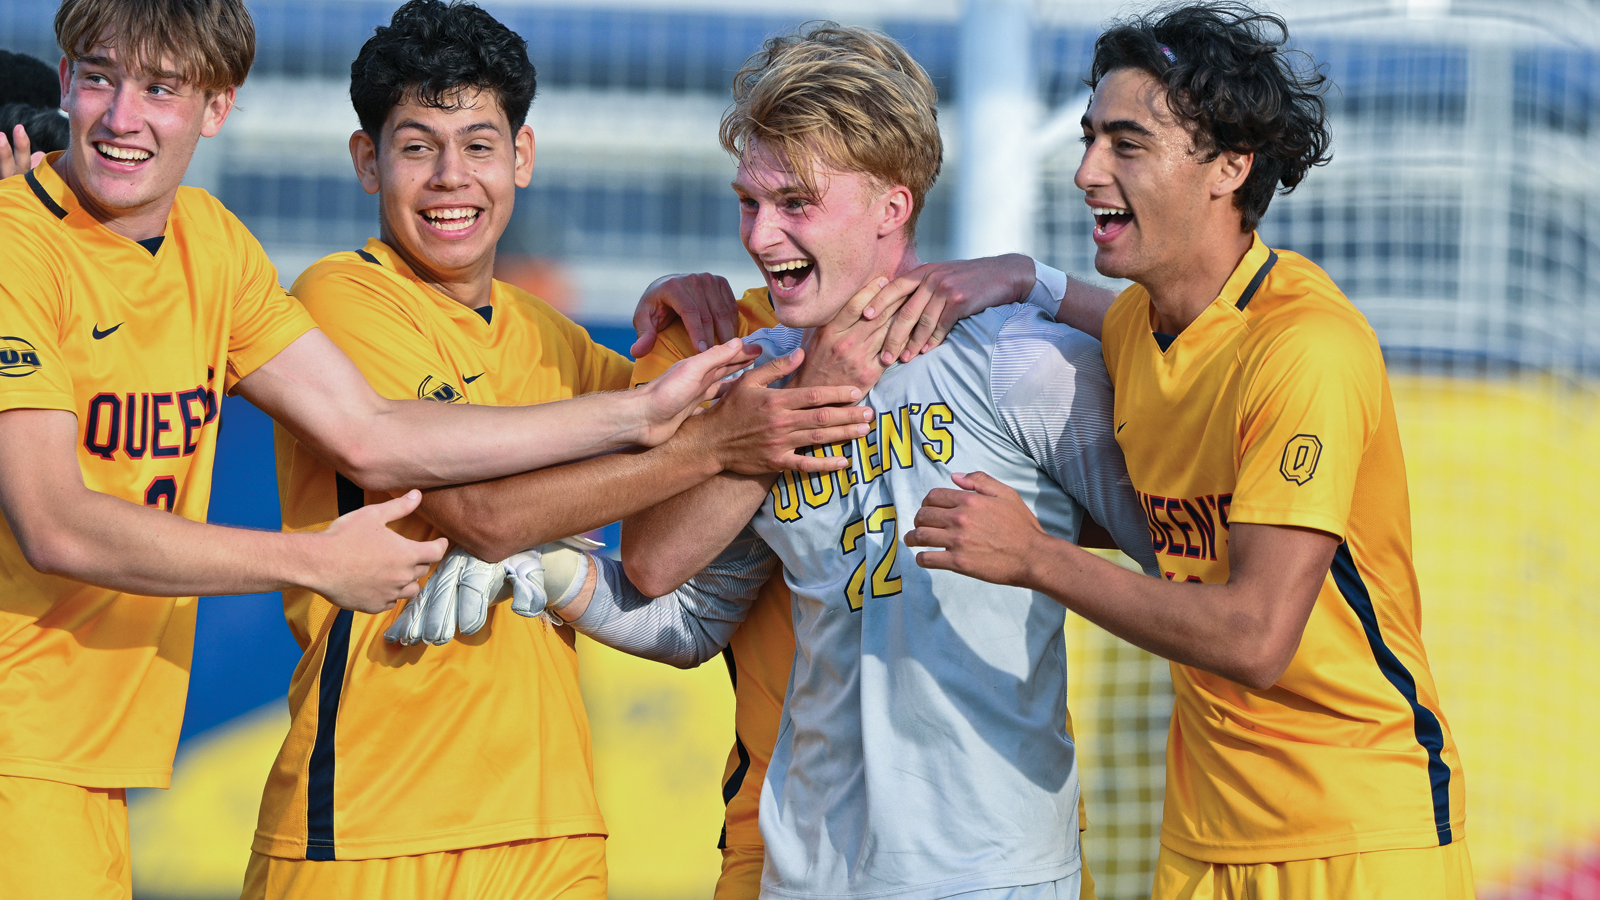 Action photo of Queen's men's soccer players celebrating with and high-fiving goalkeeper Connor Adams